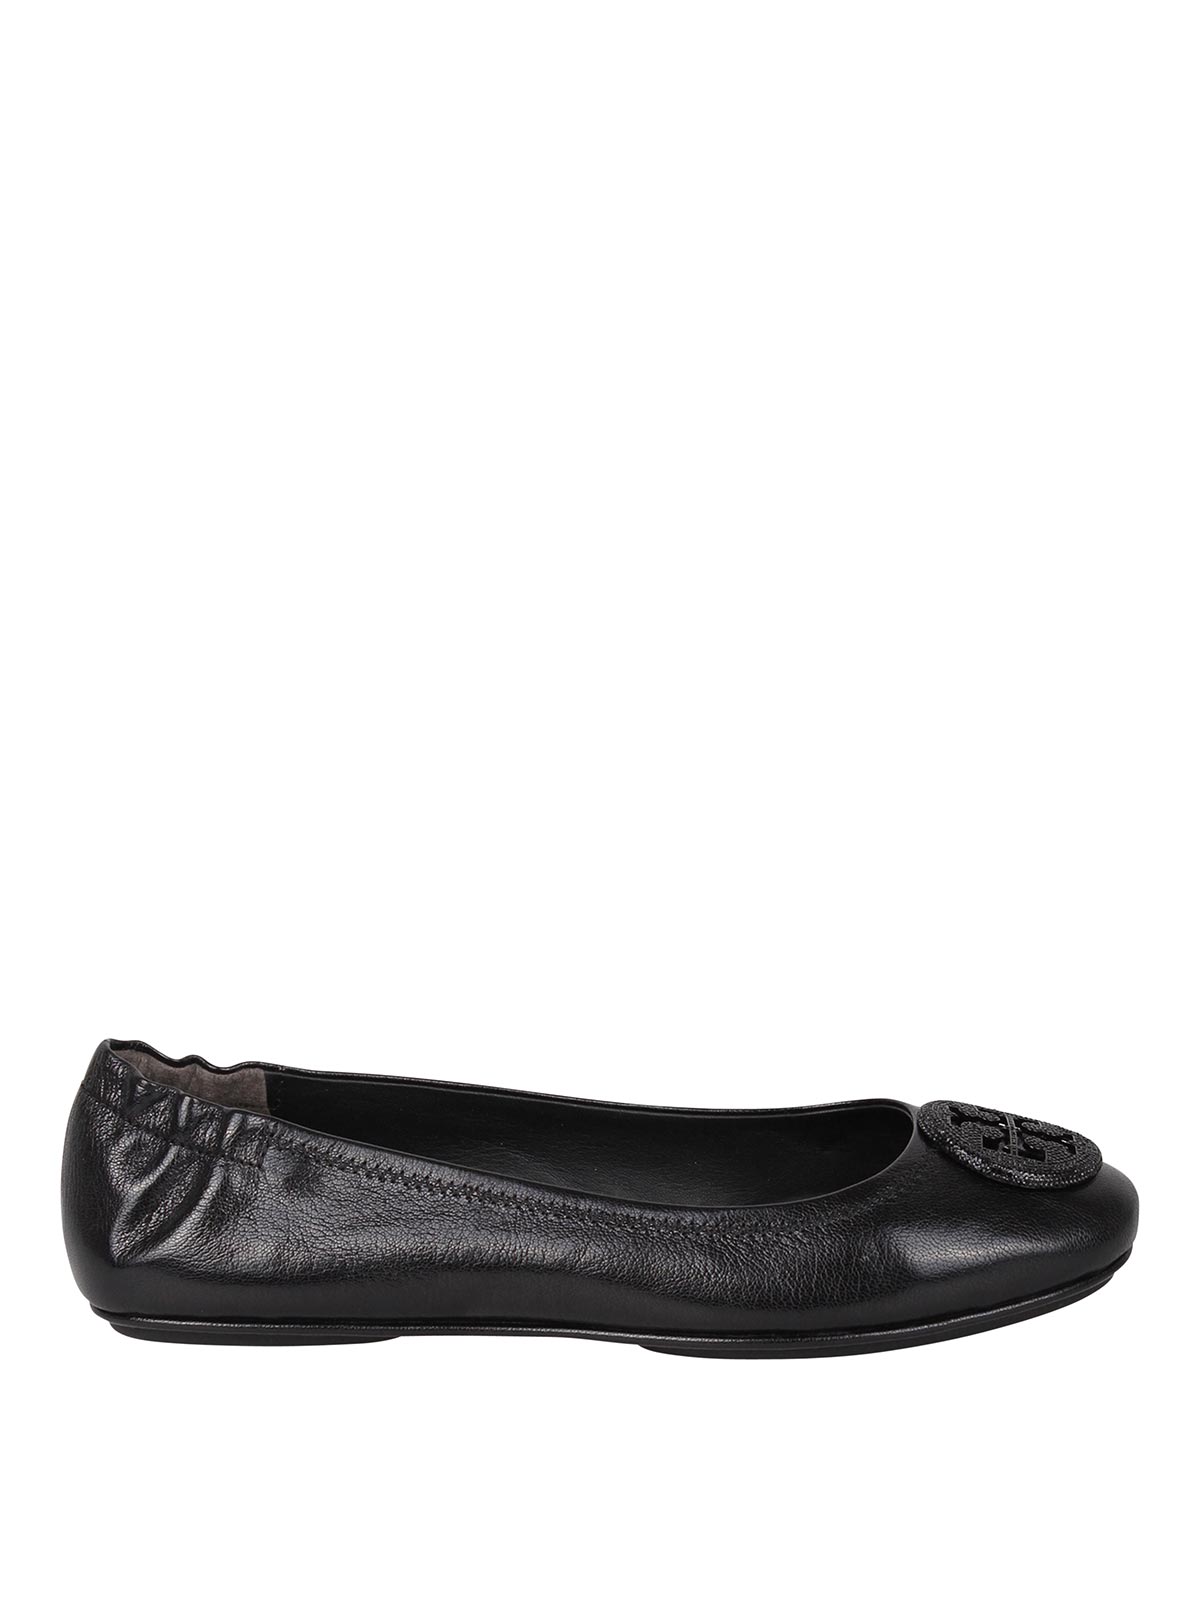 Shop Tory Burch Minnie Mouse Ballerinas In Black